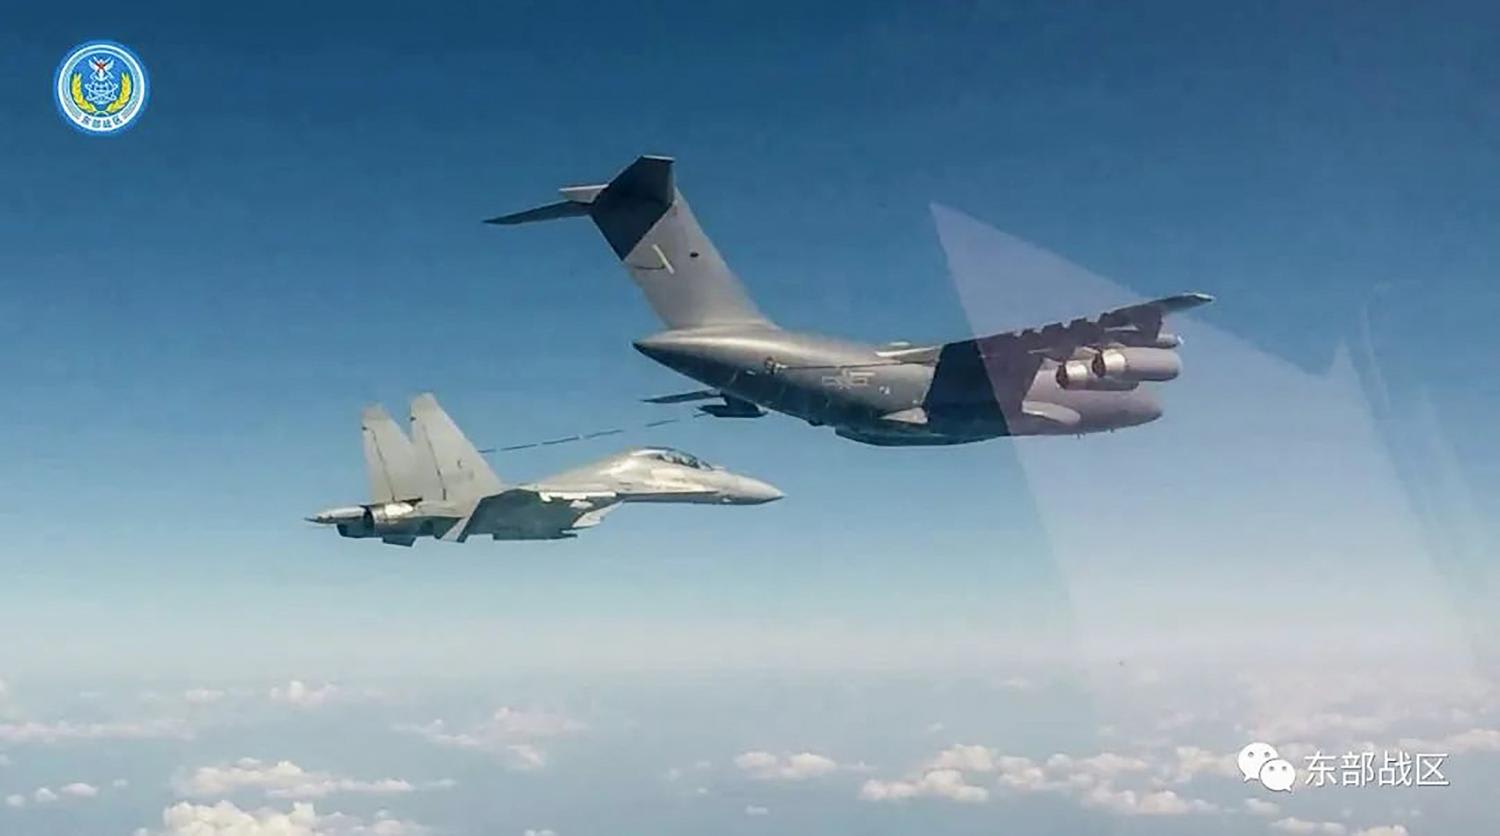 Handout image taken on Aug 9, 2022 and released by the Eastern Theater Command of the Chinese People's Liberation Army (PLA) on August 10 shows an air-to-air refuelling of a PLA fighter jet during a military drill in an undisclosed location.